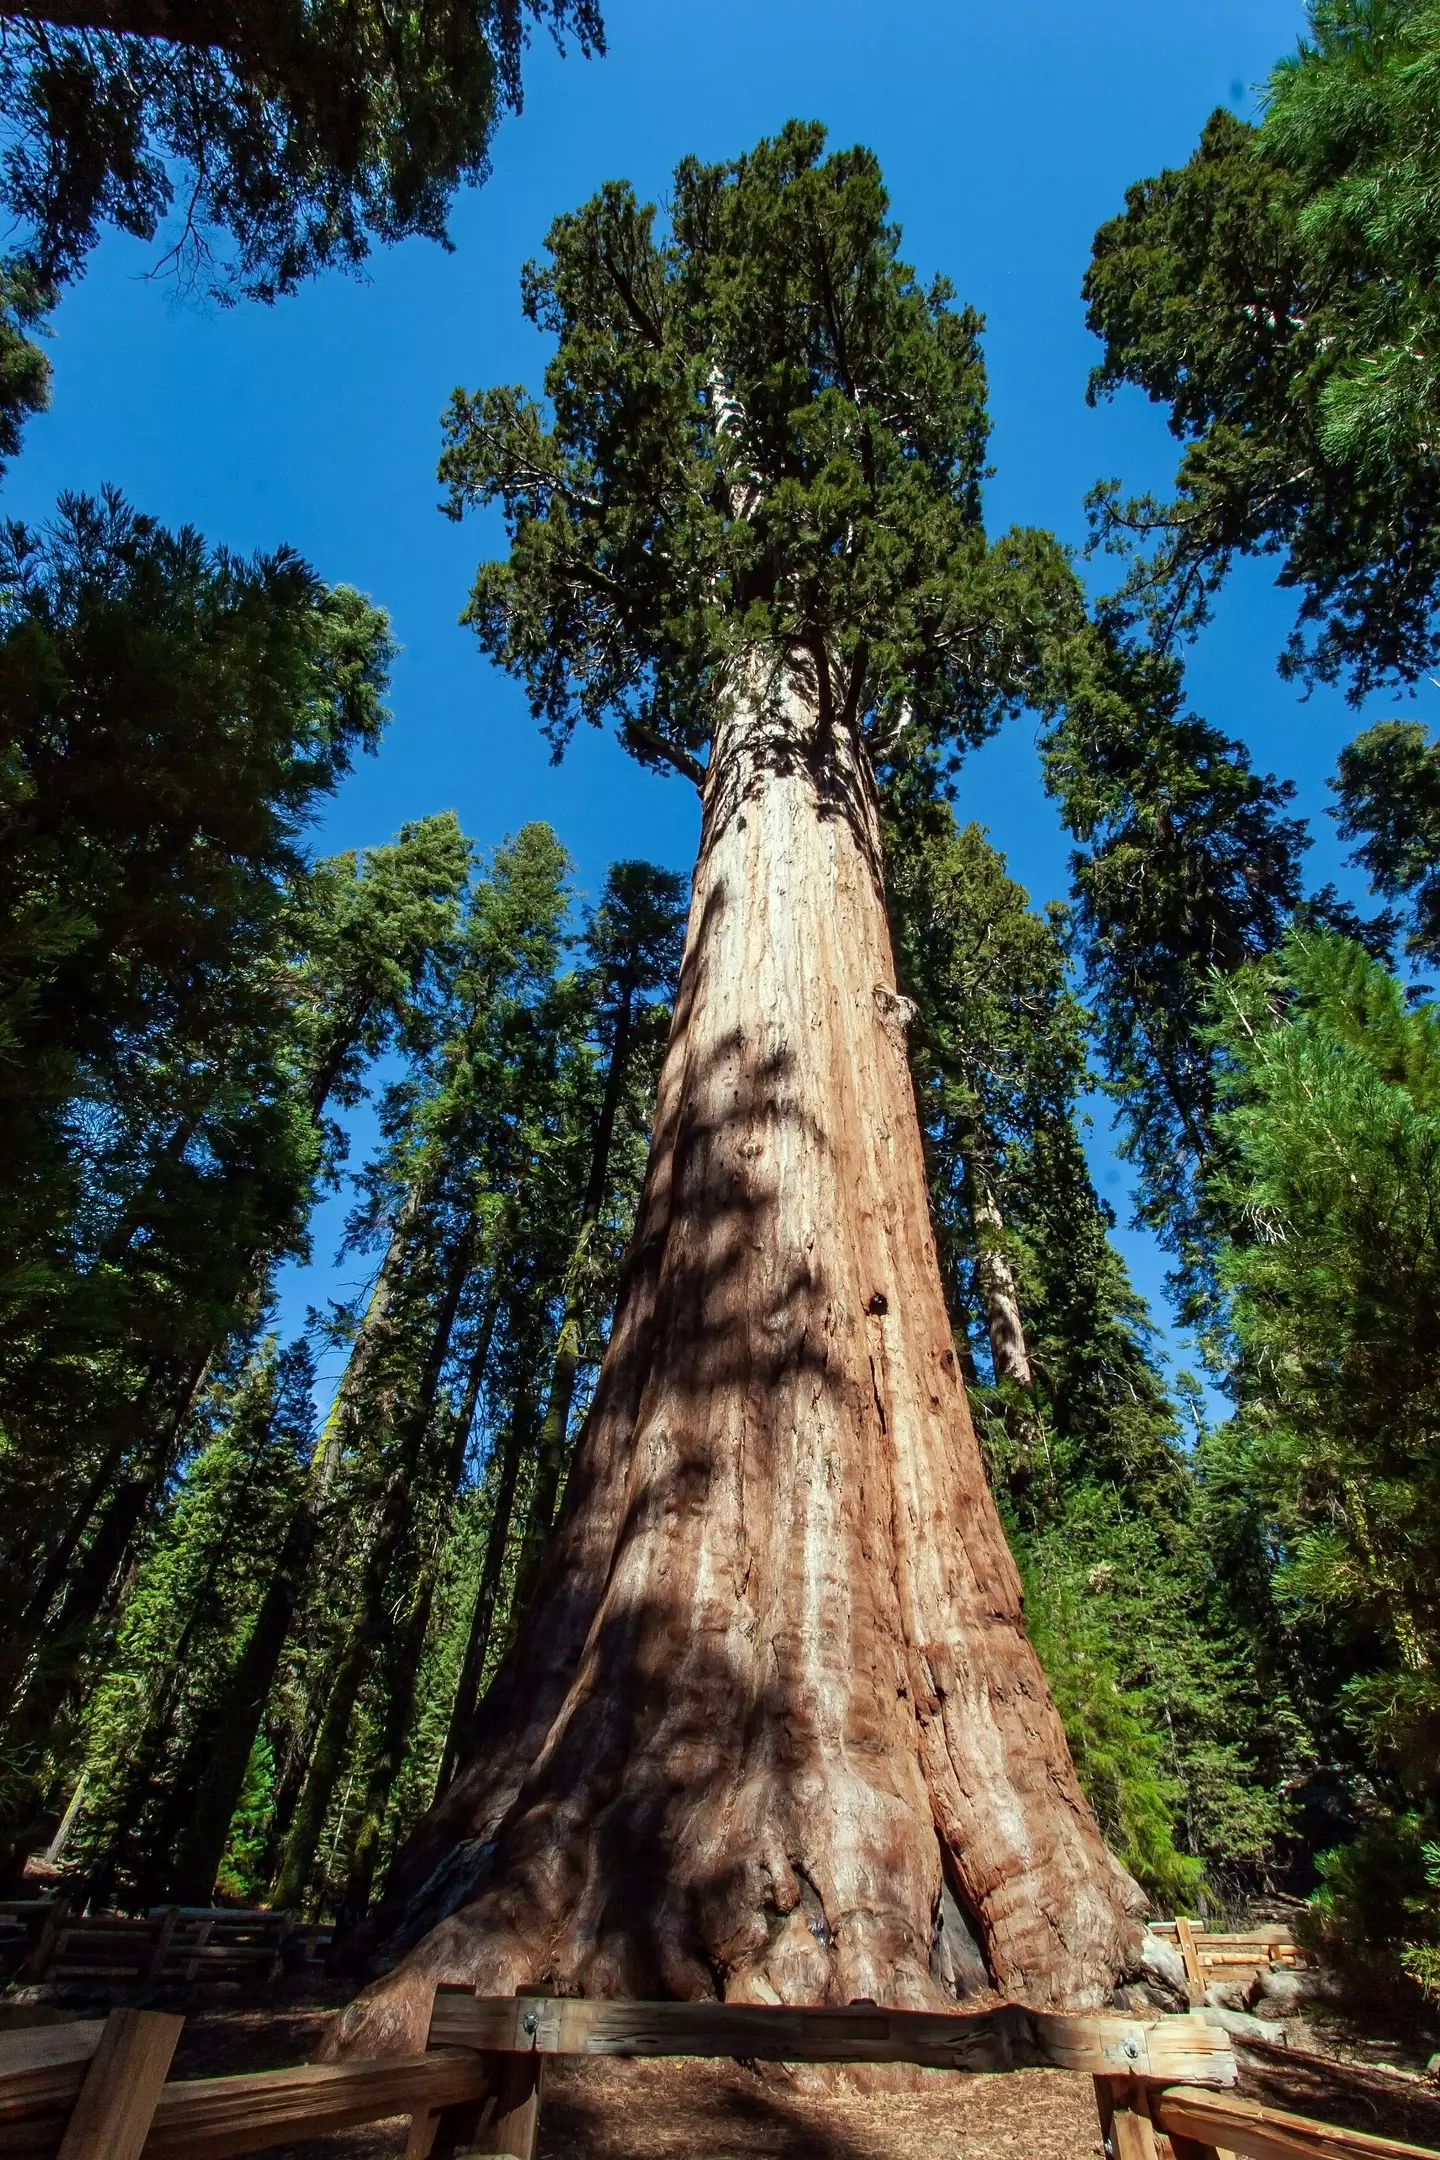 Visitors are banned from getting near the world's largest tree.